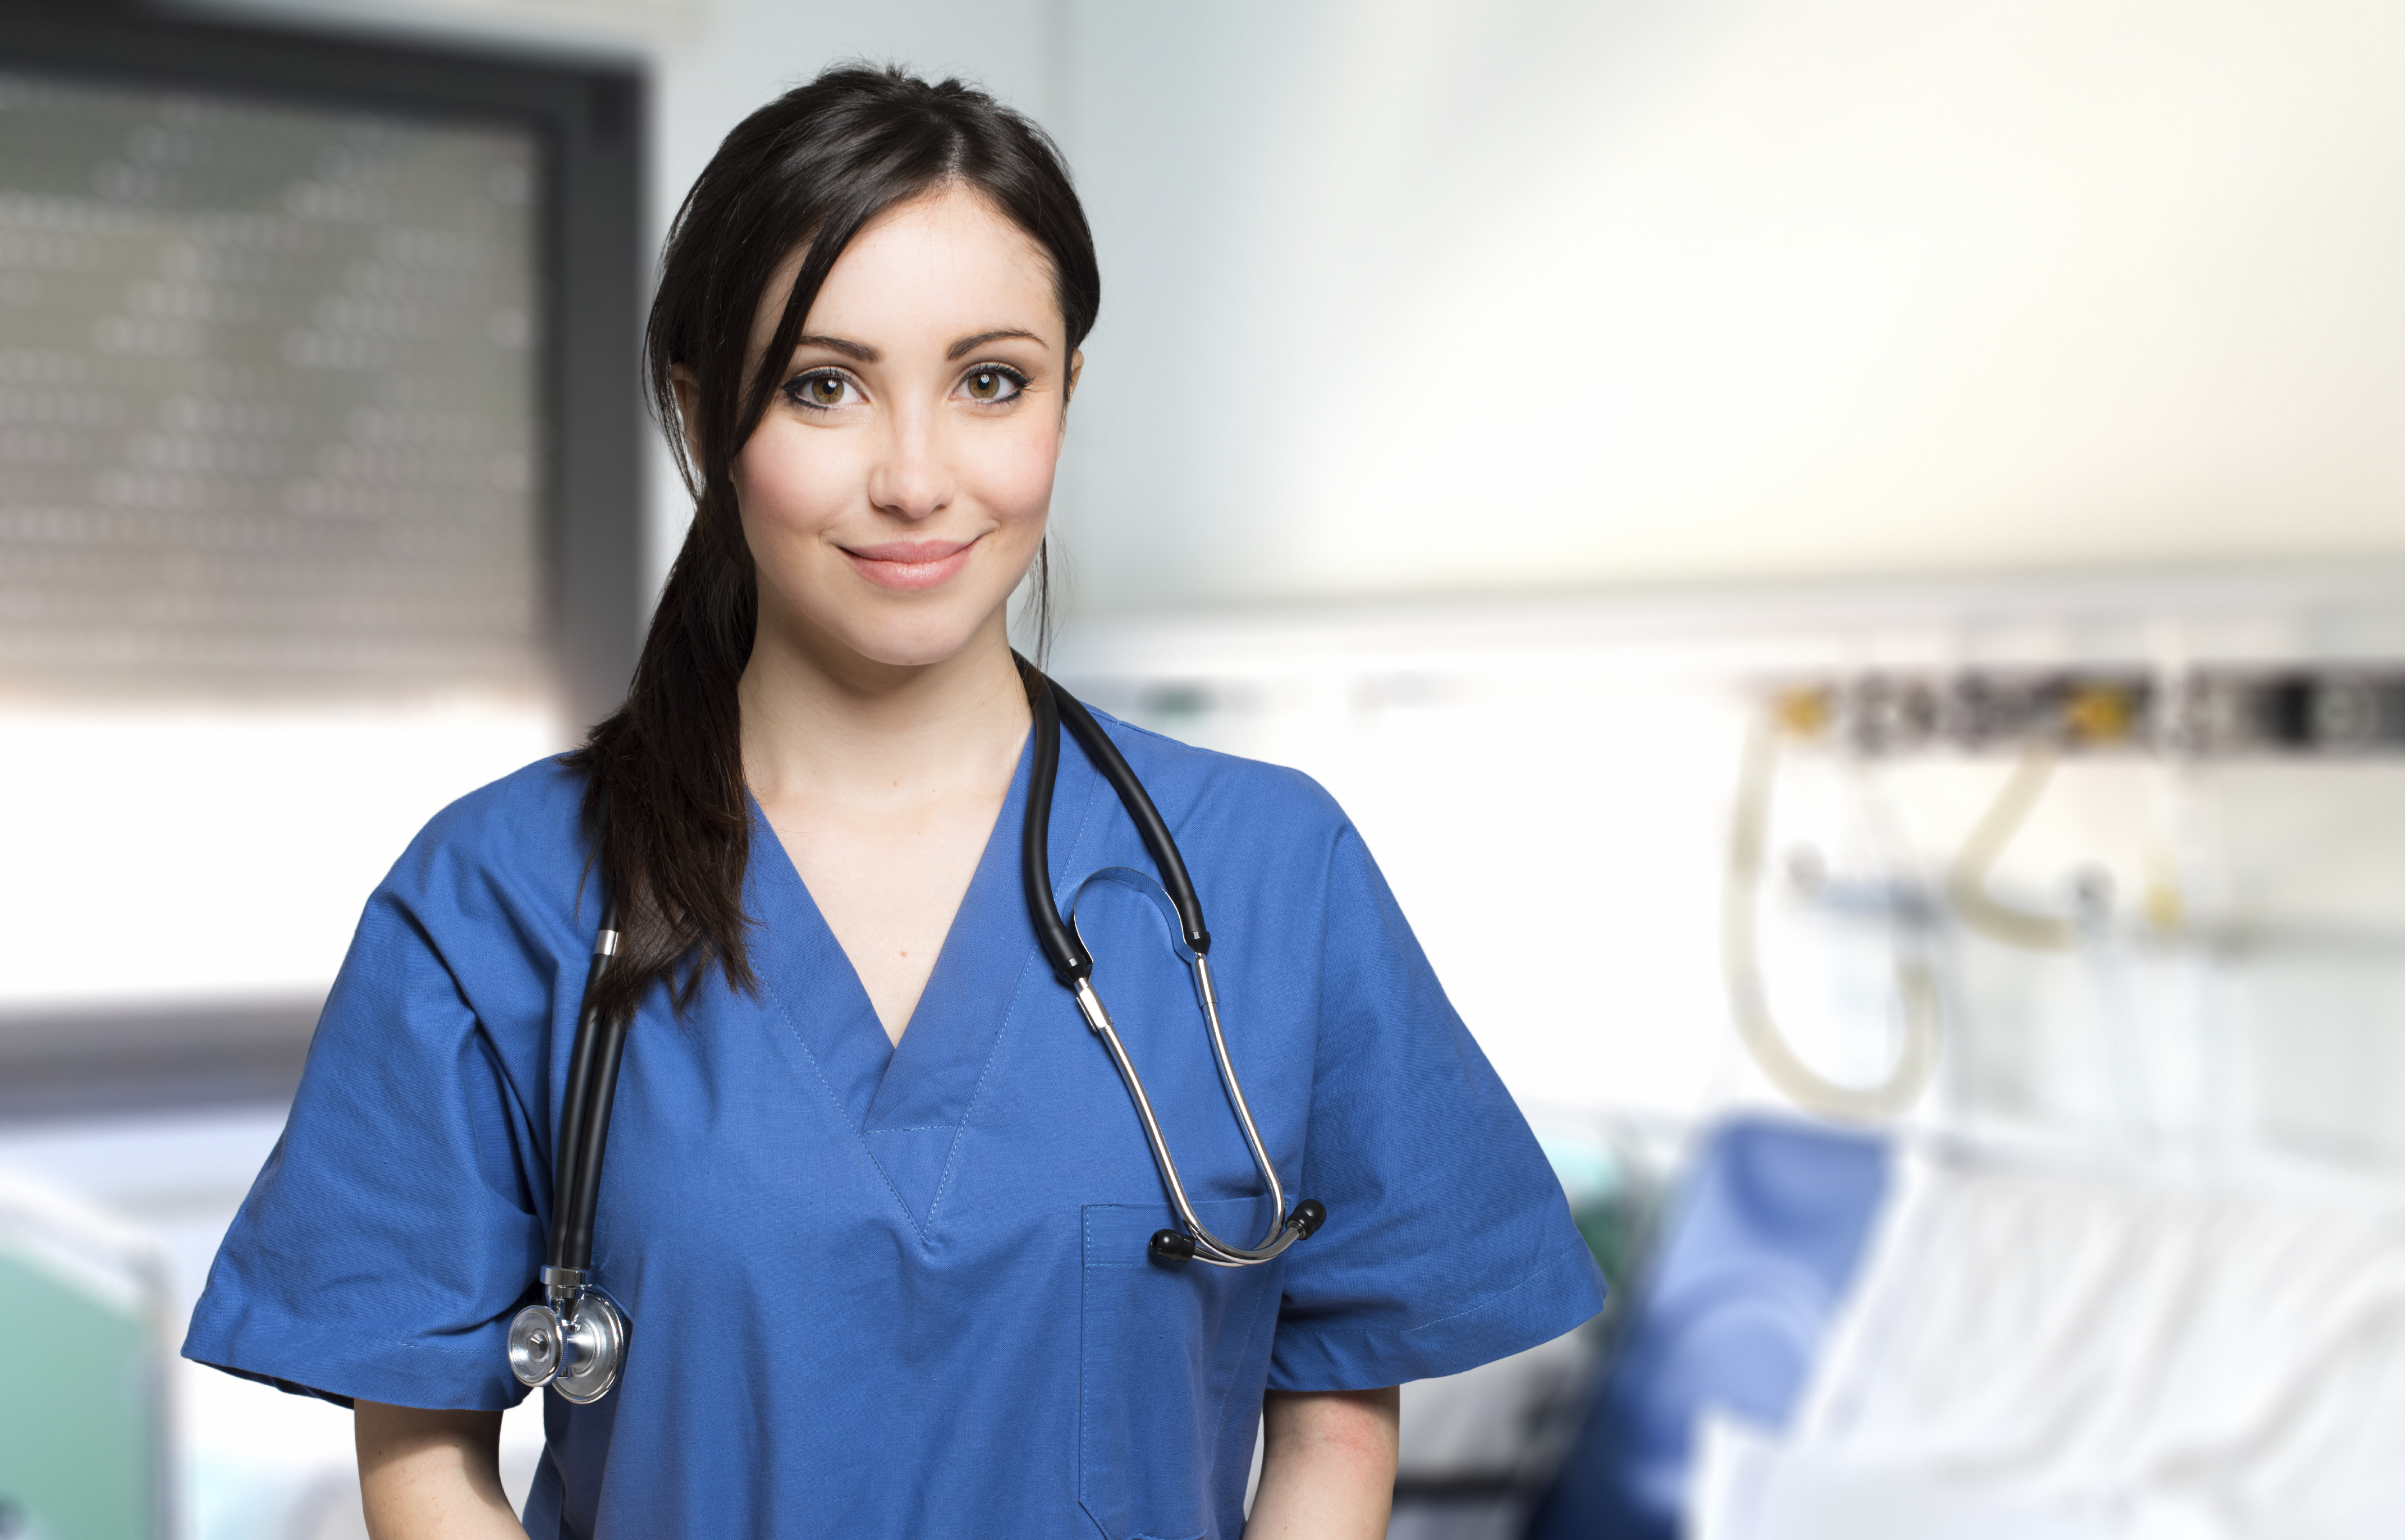 Pennsylvania 888-686-6877 Millenia Medical Staffing Travel Nursing Jobs Great Pay and Benefits